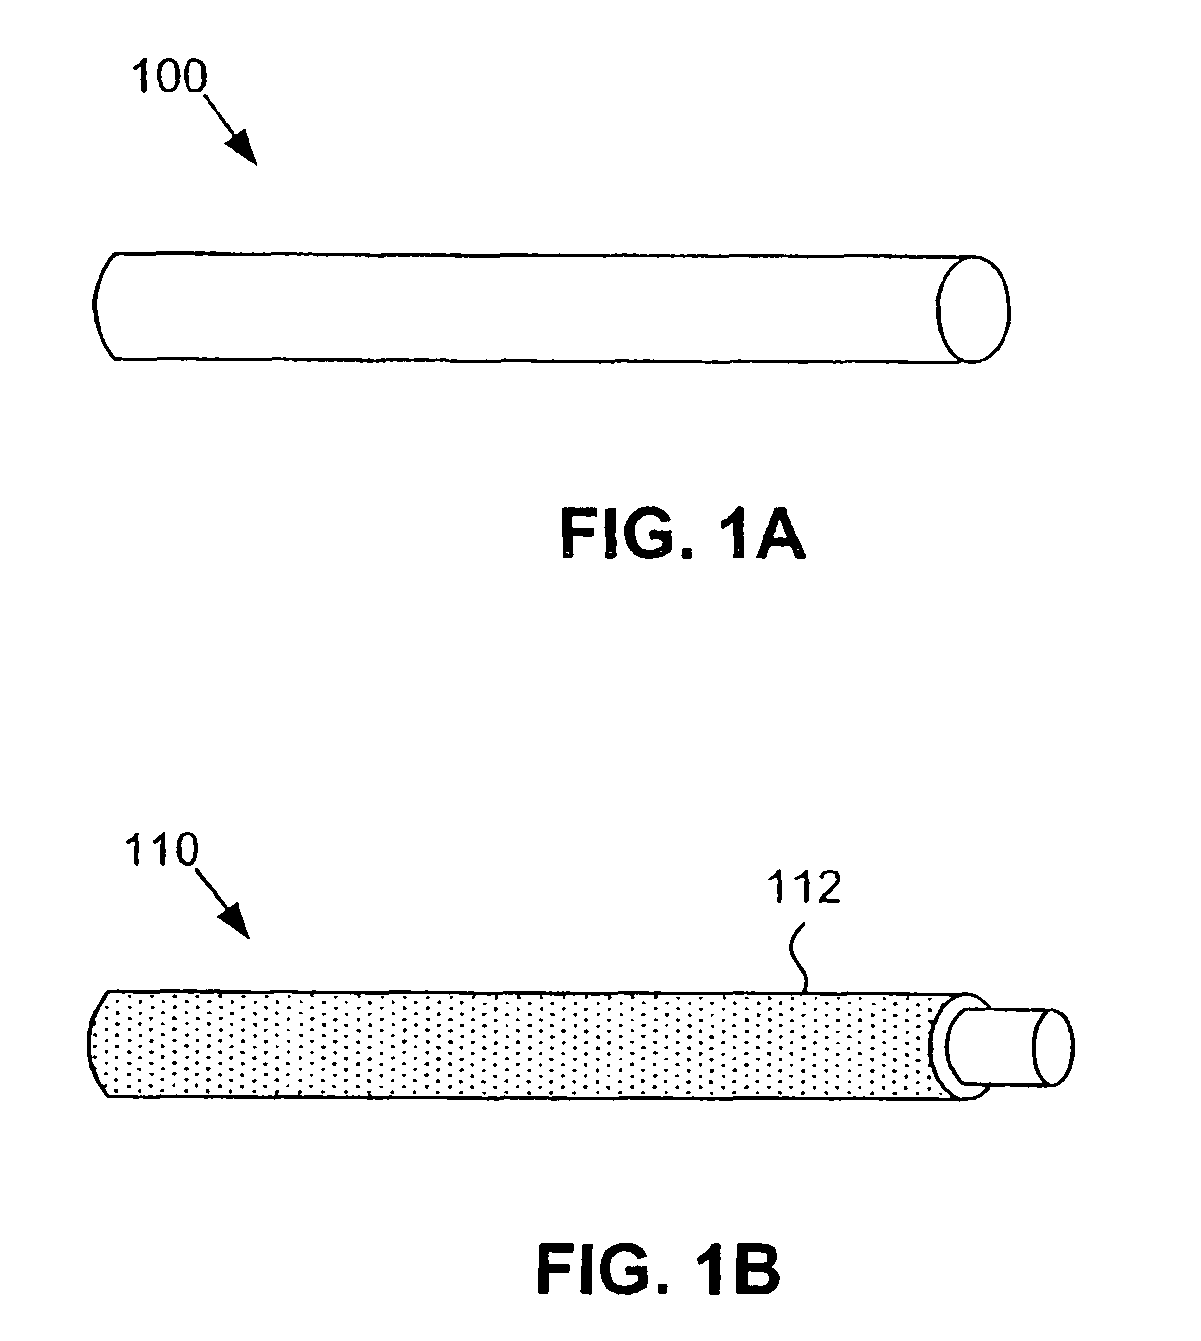 Methods for oriented growth of nanowires on patterned substrates